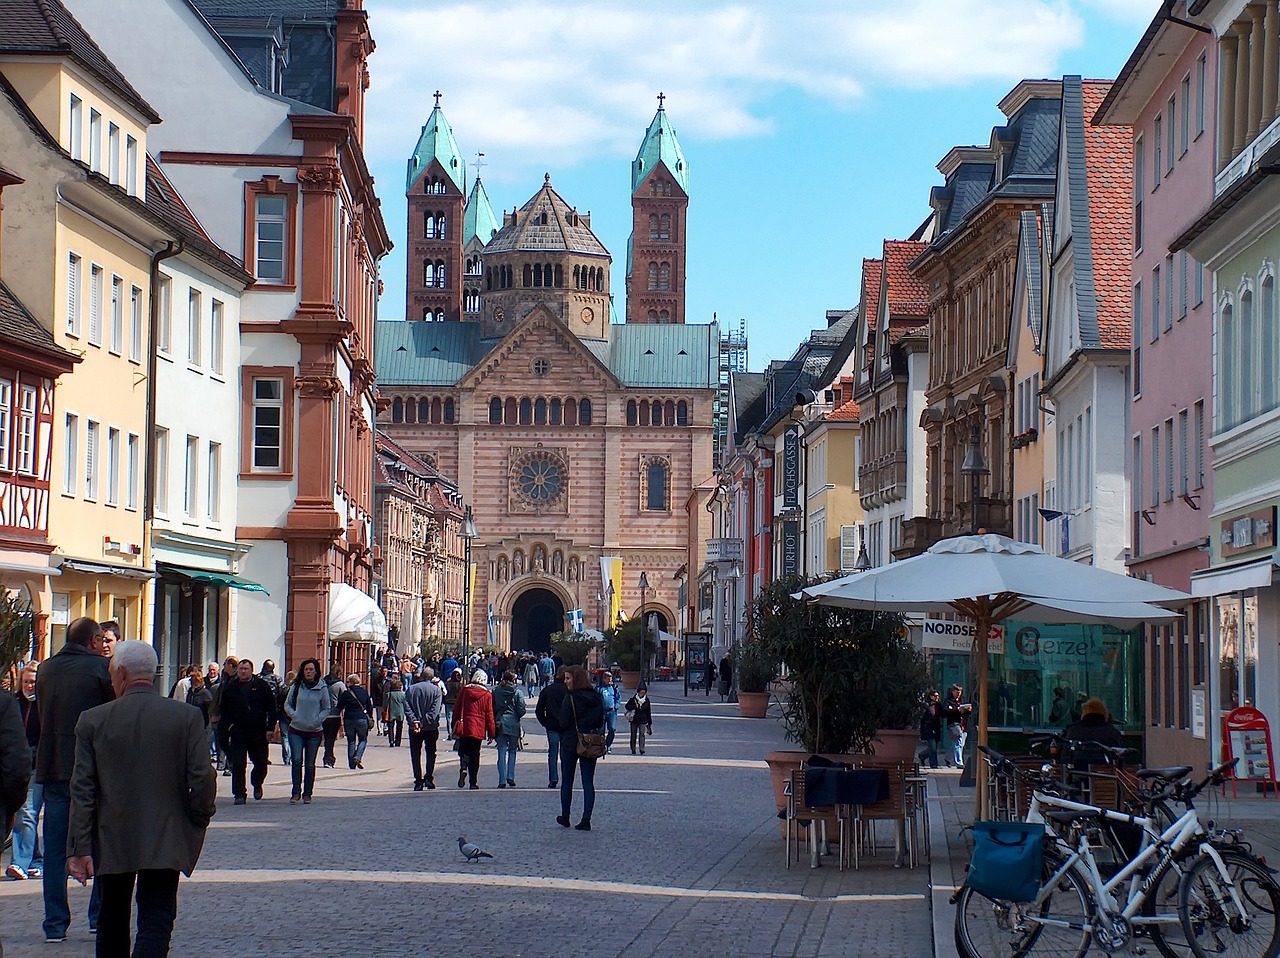 The German town of Speyer